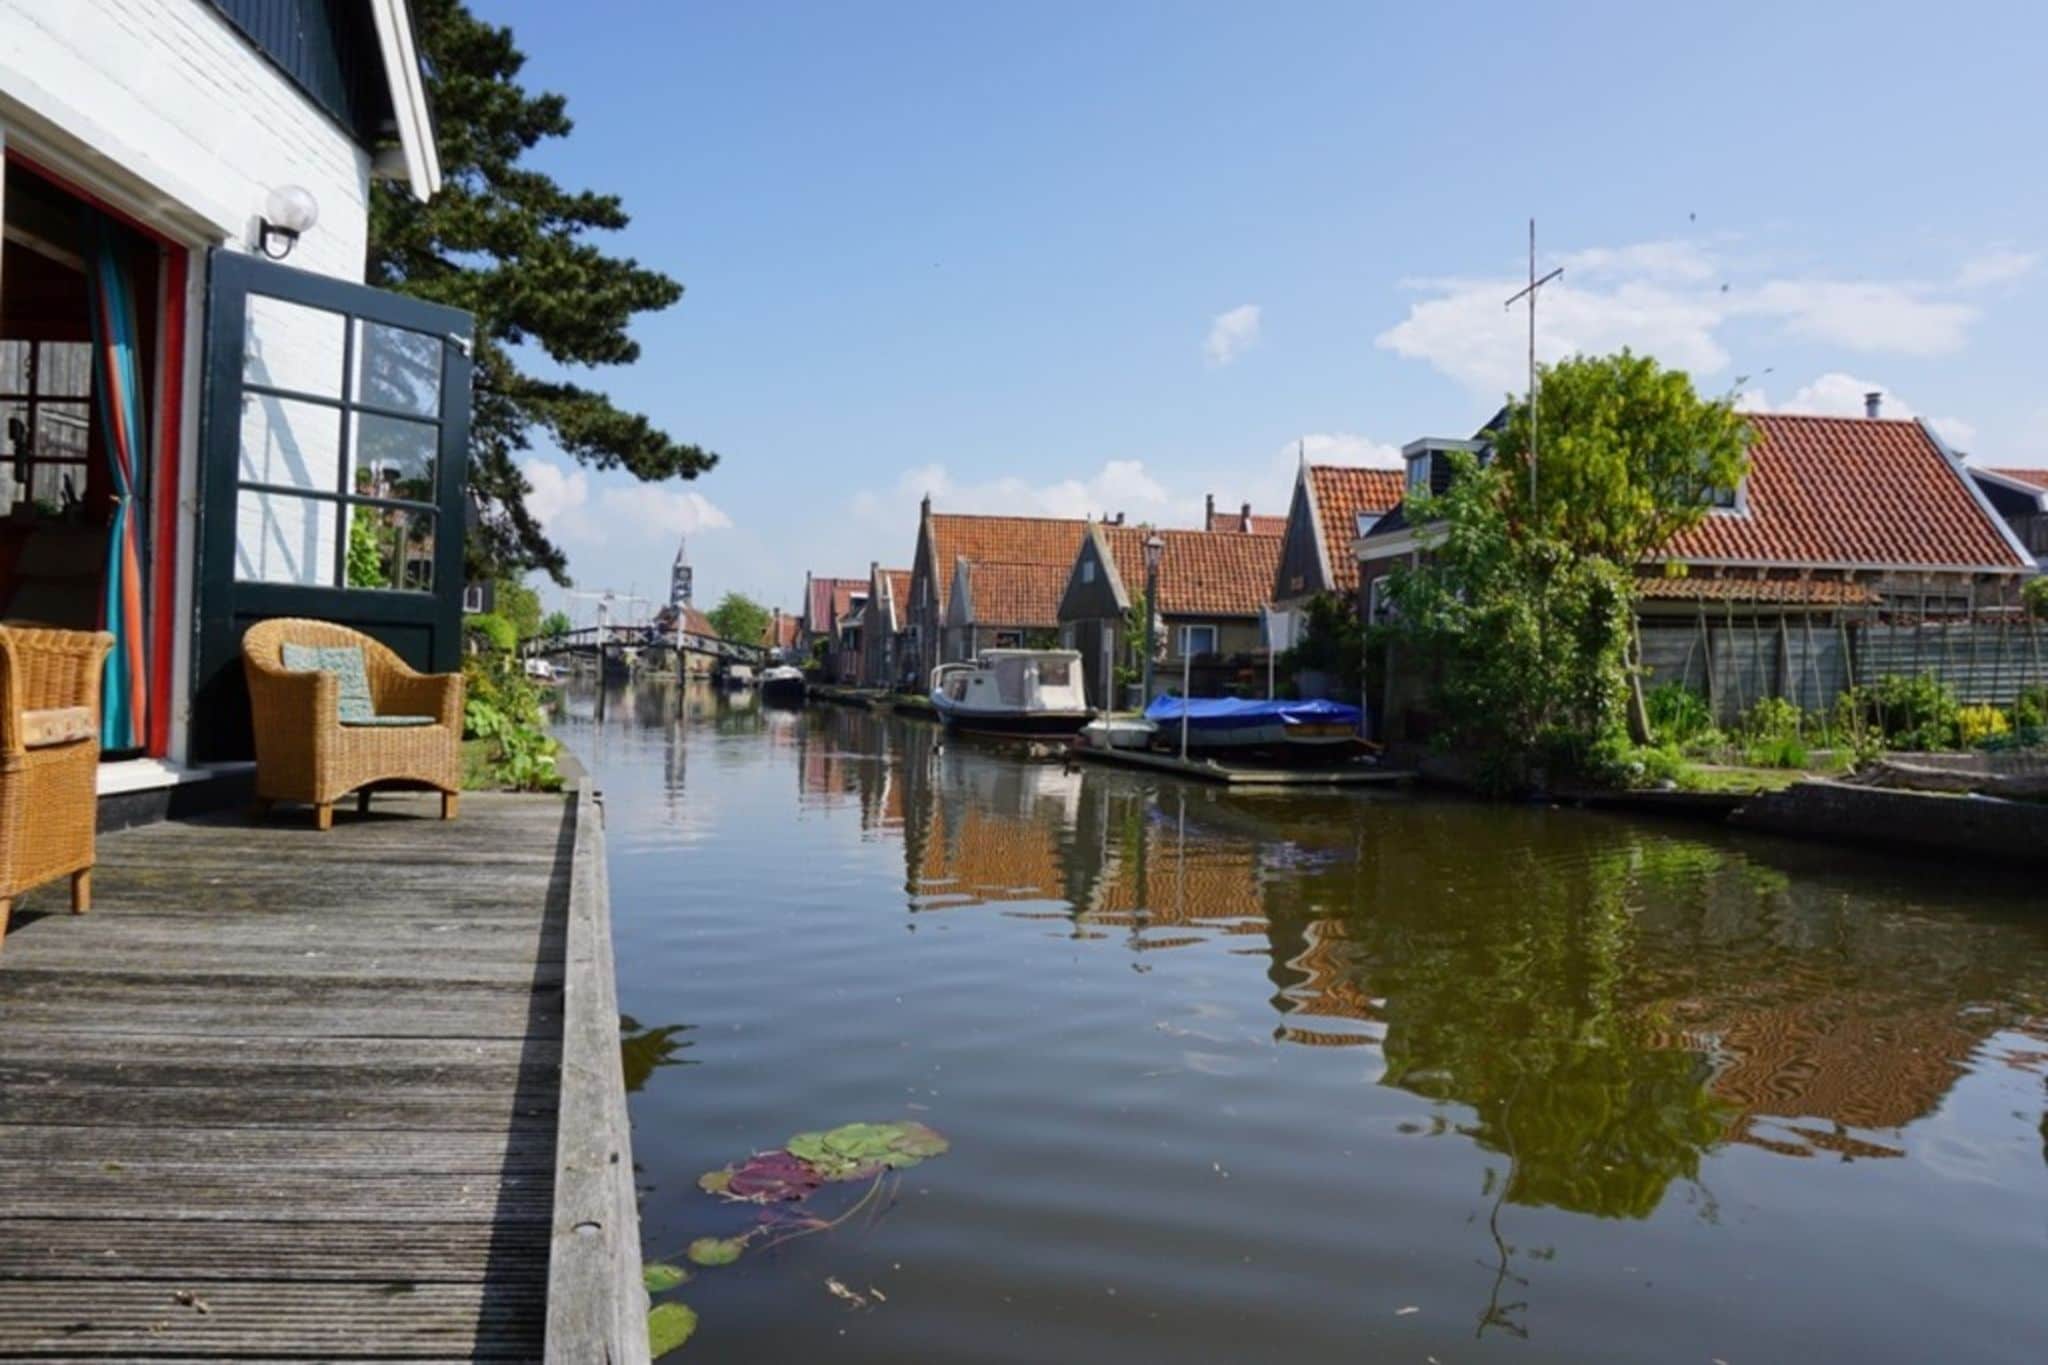 Lovely holiday home in Hindeloopen in a great setting, on the 11 city tour route